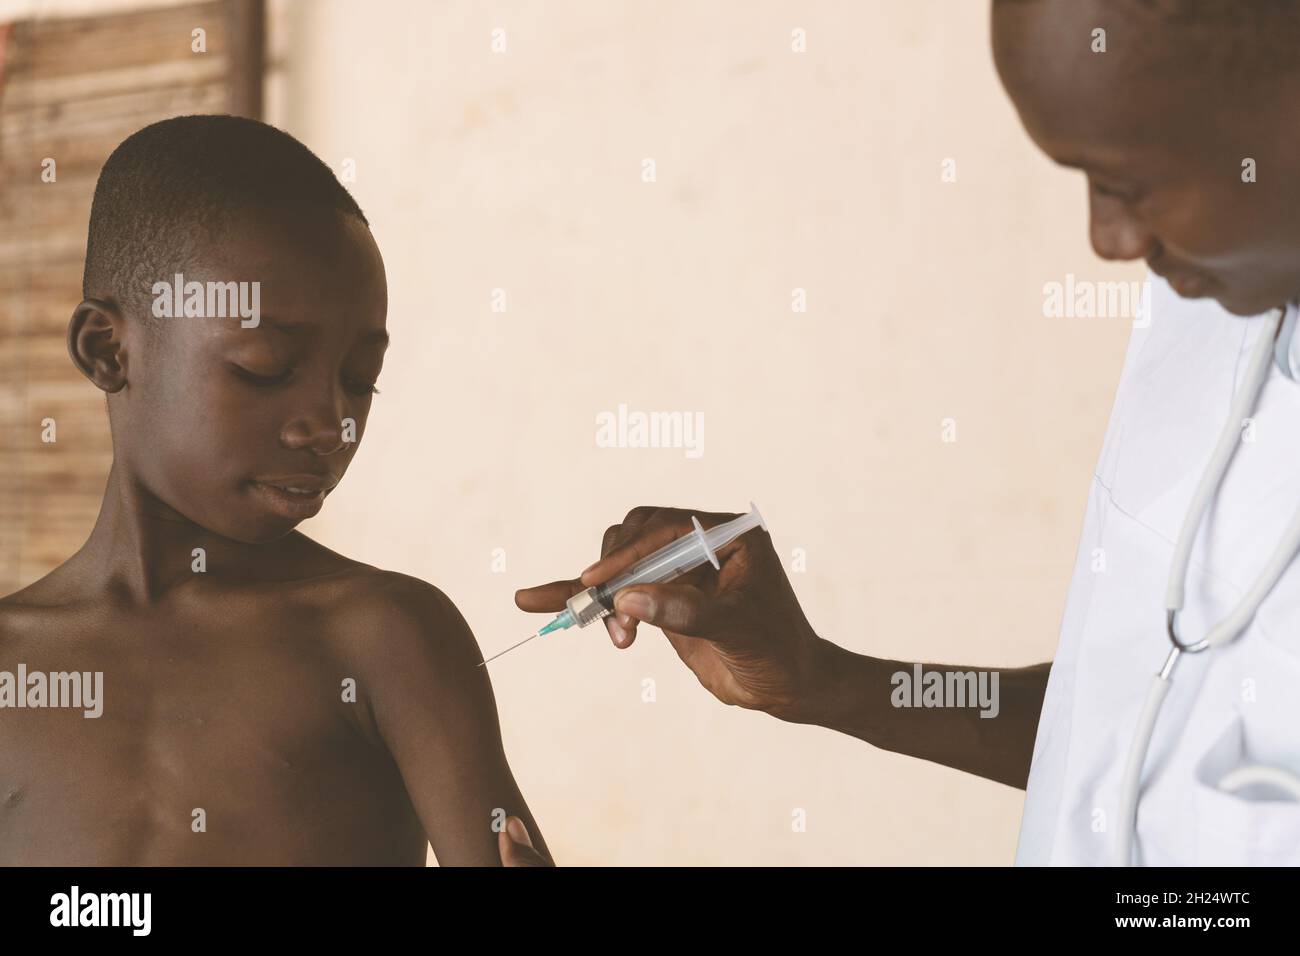 In this image, a doctor is explaing to a small confident looking black boy what happens during malaria vaccination Stock Photo